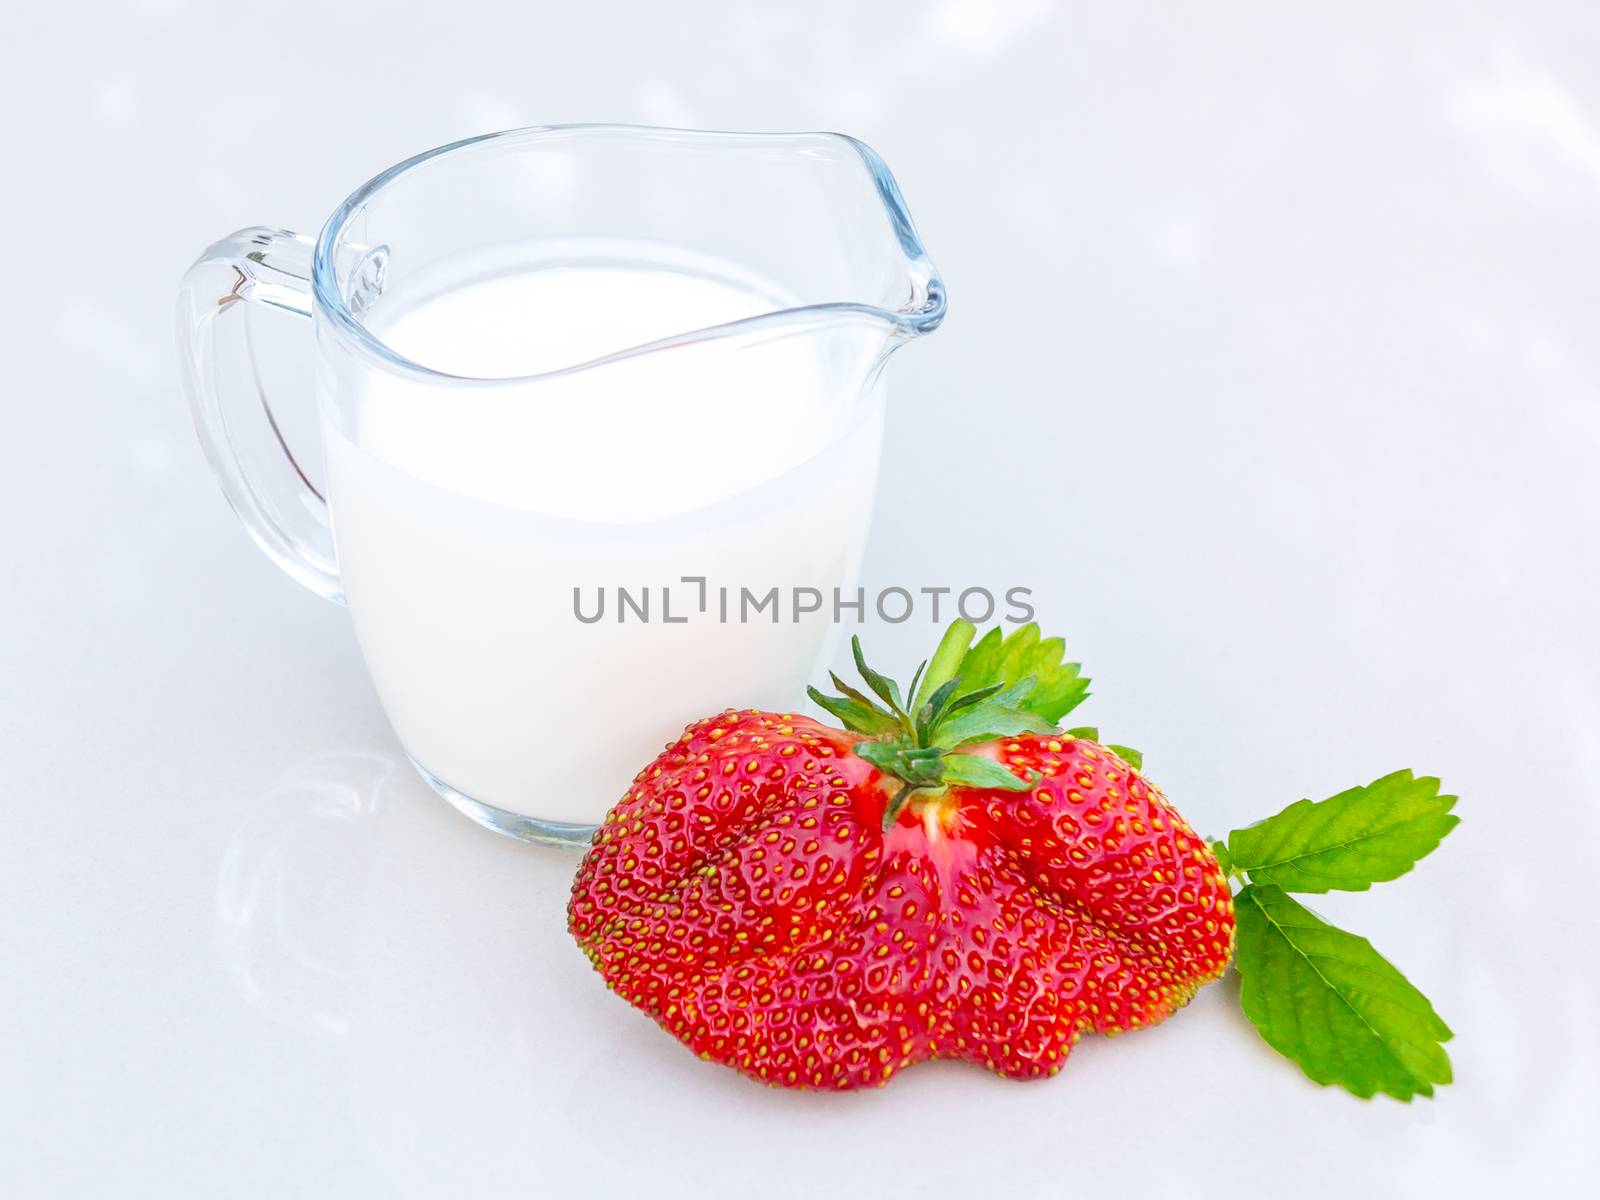 A huge ripe strawberry and cream sauce on the table on a bright table.